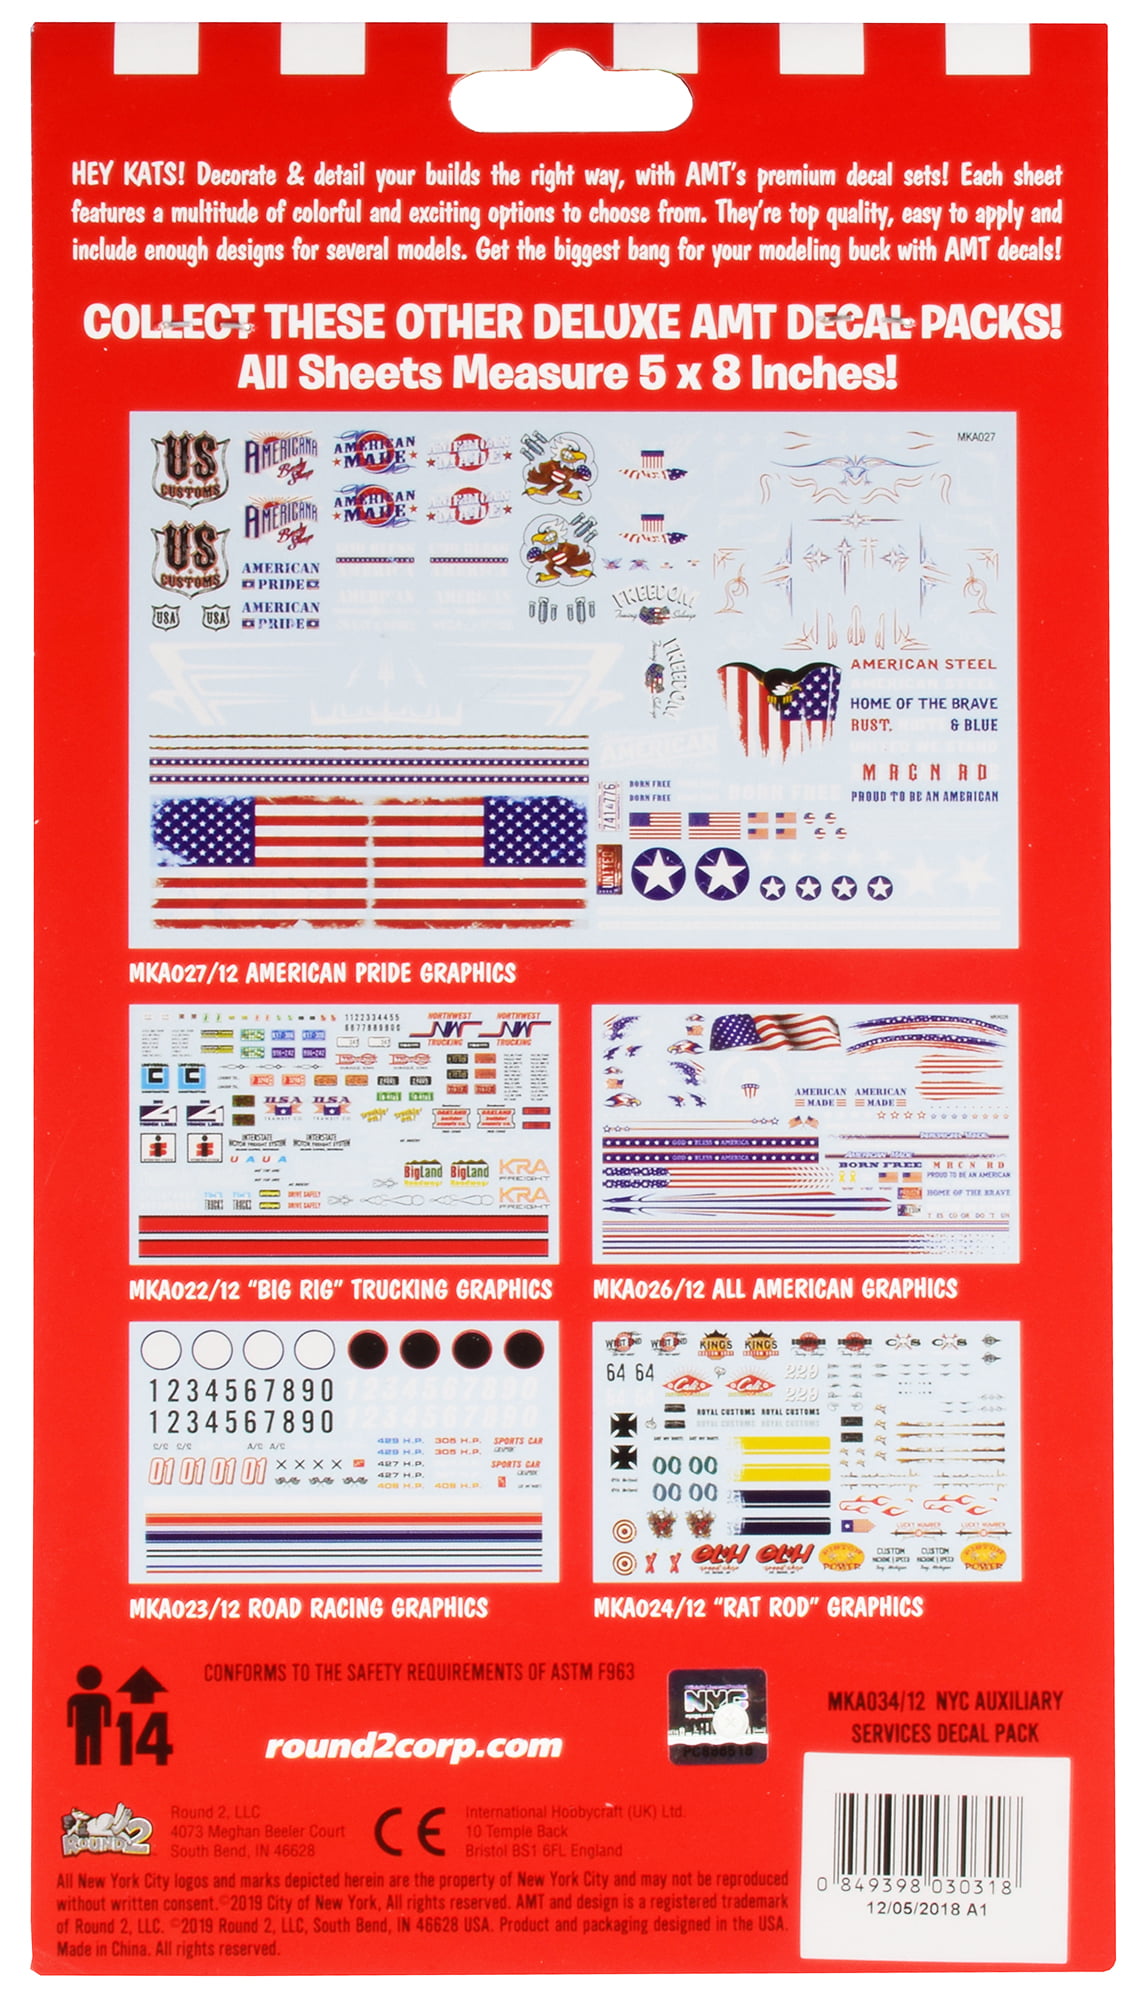 19C Details about   AMT NYC Auxiliary Services Logos Water Release Decals 1/25 Scale 